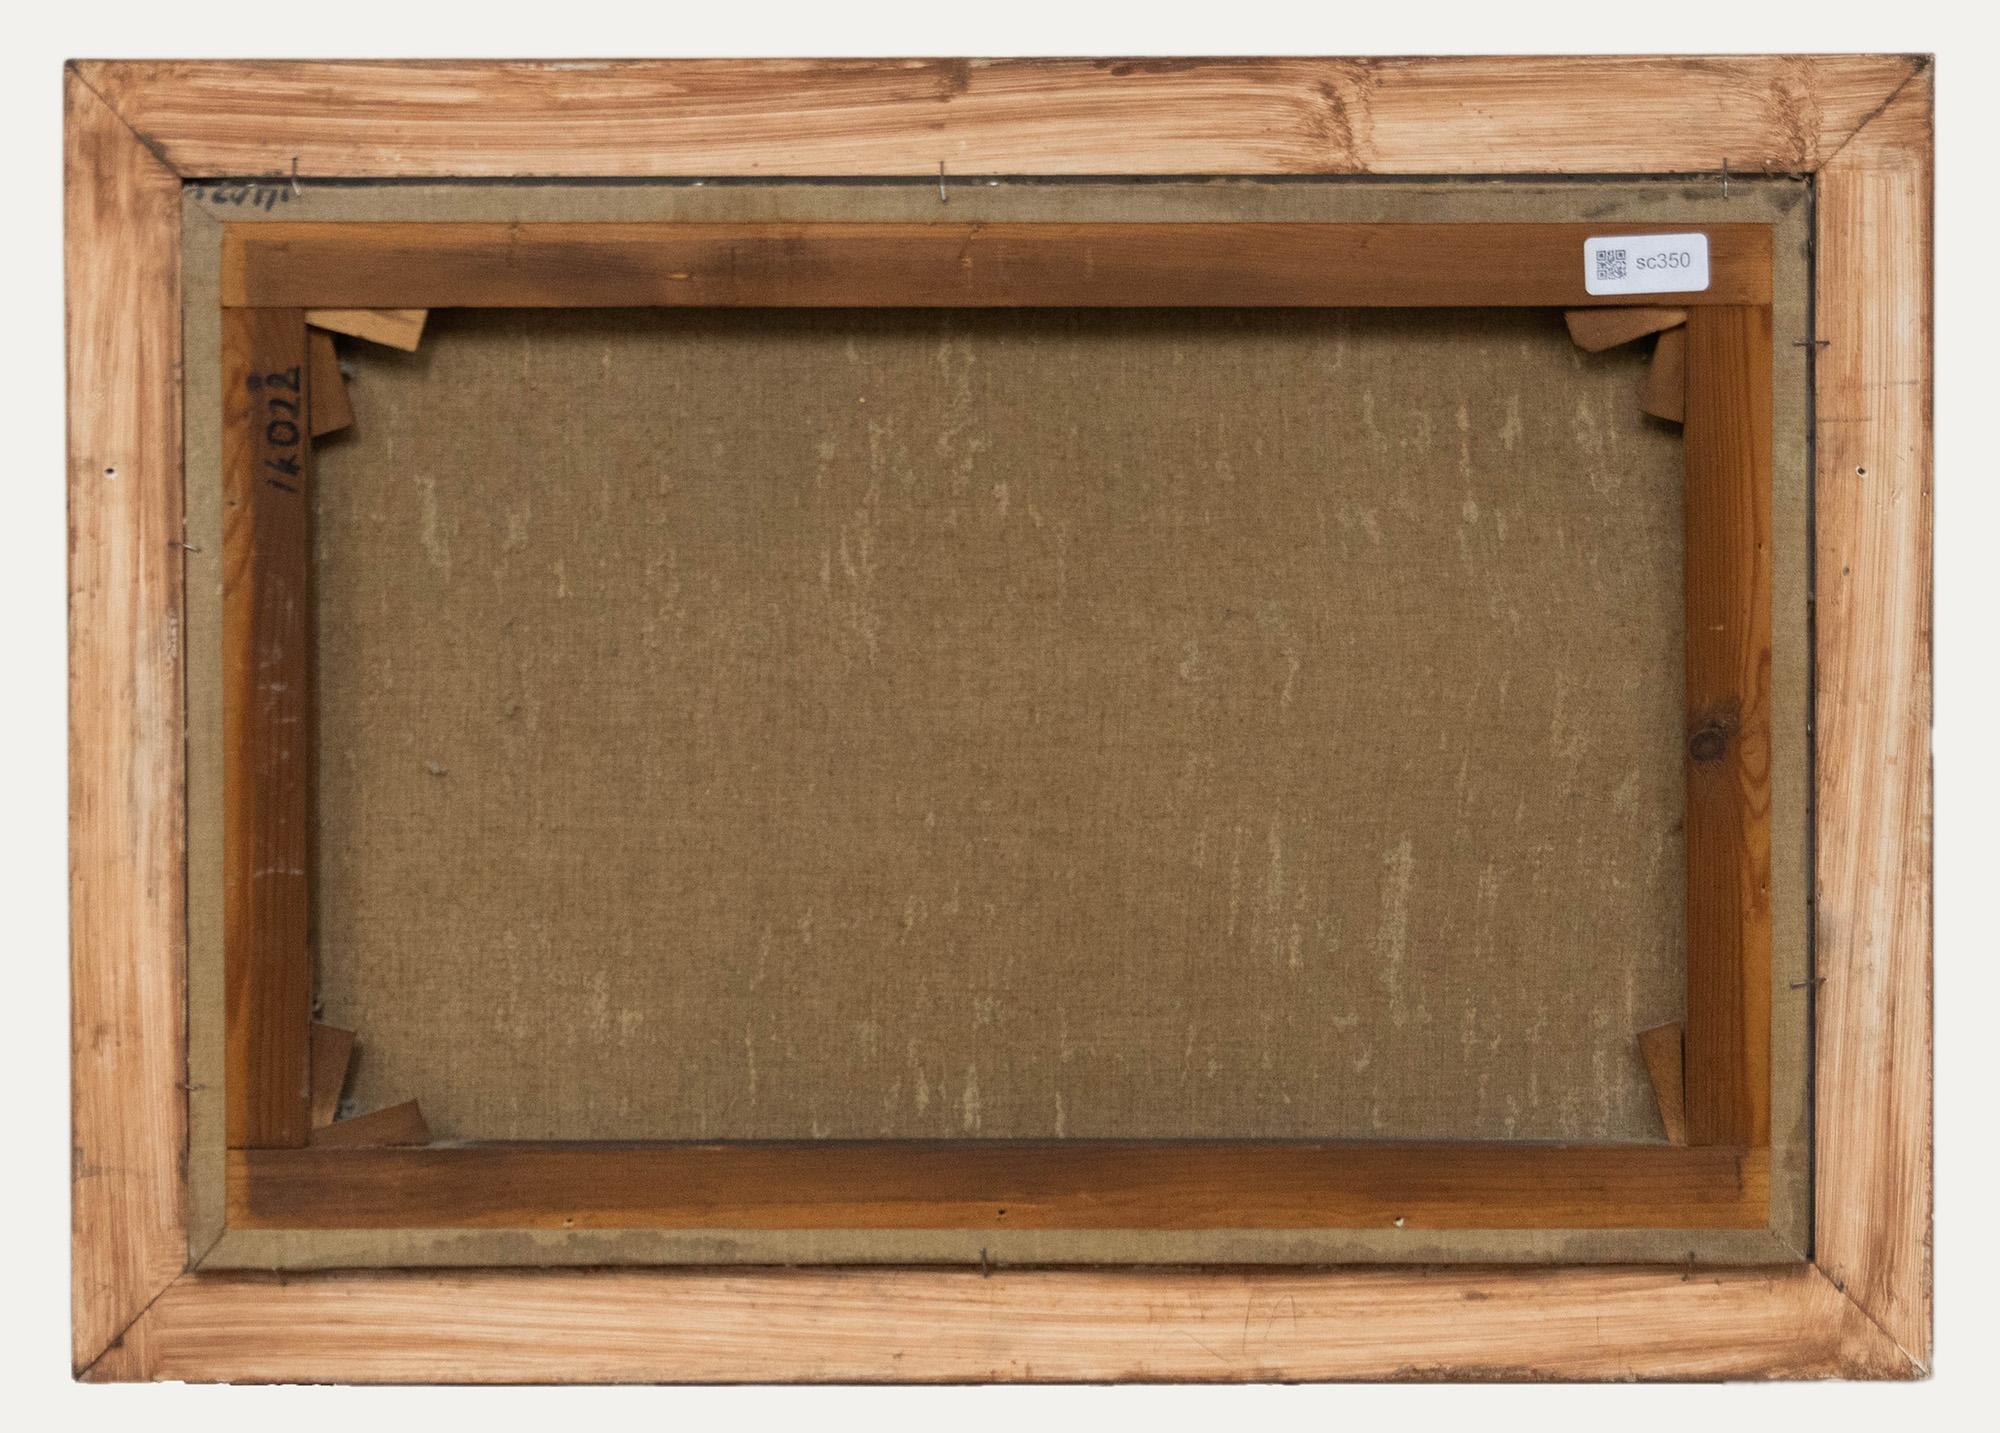 Unsigned. Presented in a gilt composition frame with ornate foliate scrolling. On canvas.
